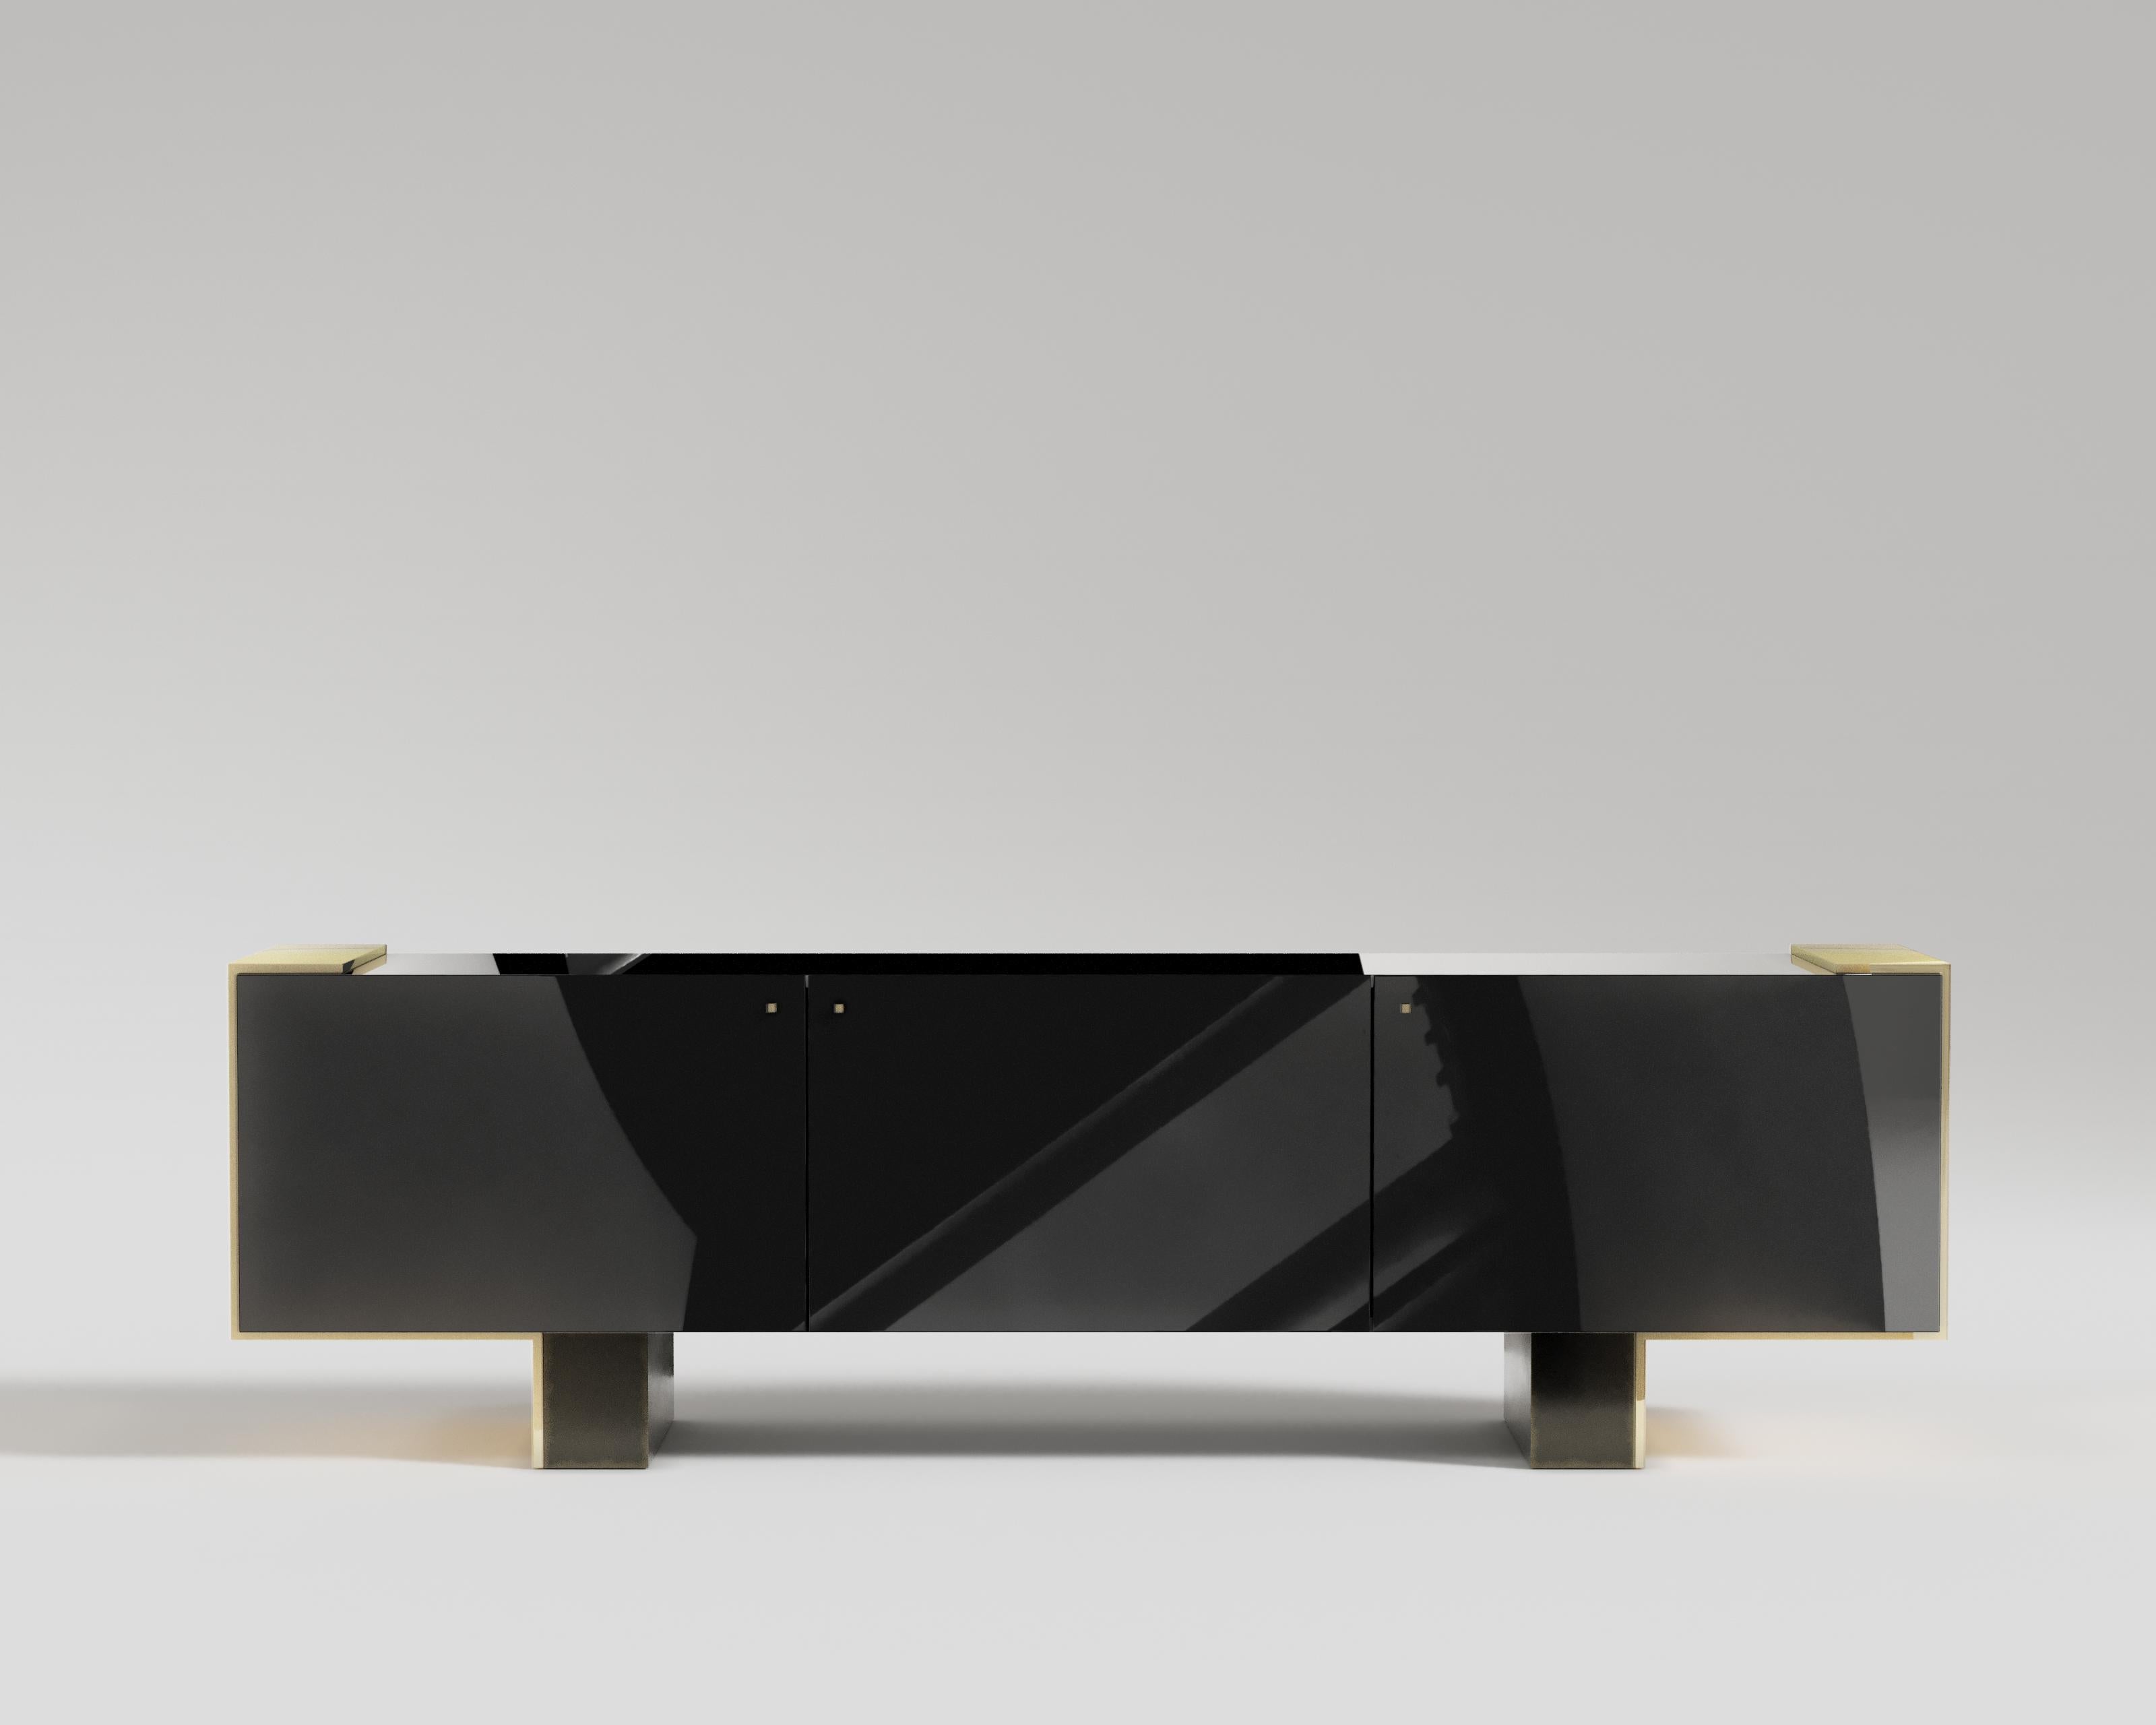 Câline Console
The Câline Console is a modern luxury piece with hints of industrial trends and contemporary flare. With a sleek, tailored design, Câline is well suited for a sophisticated home that yearns for a touch of gold. Black lacquer and